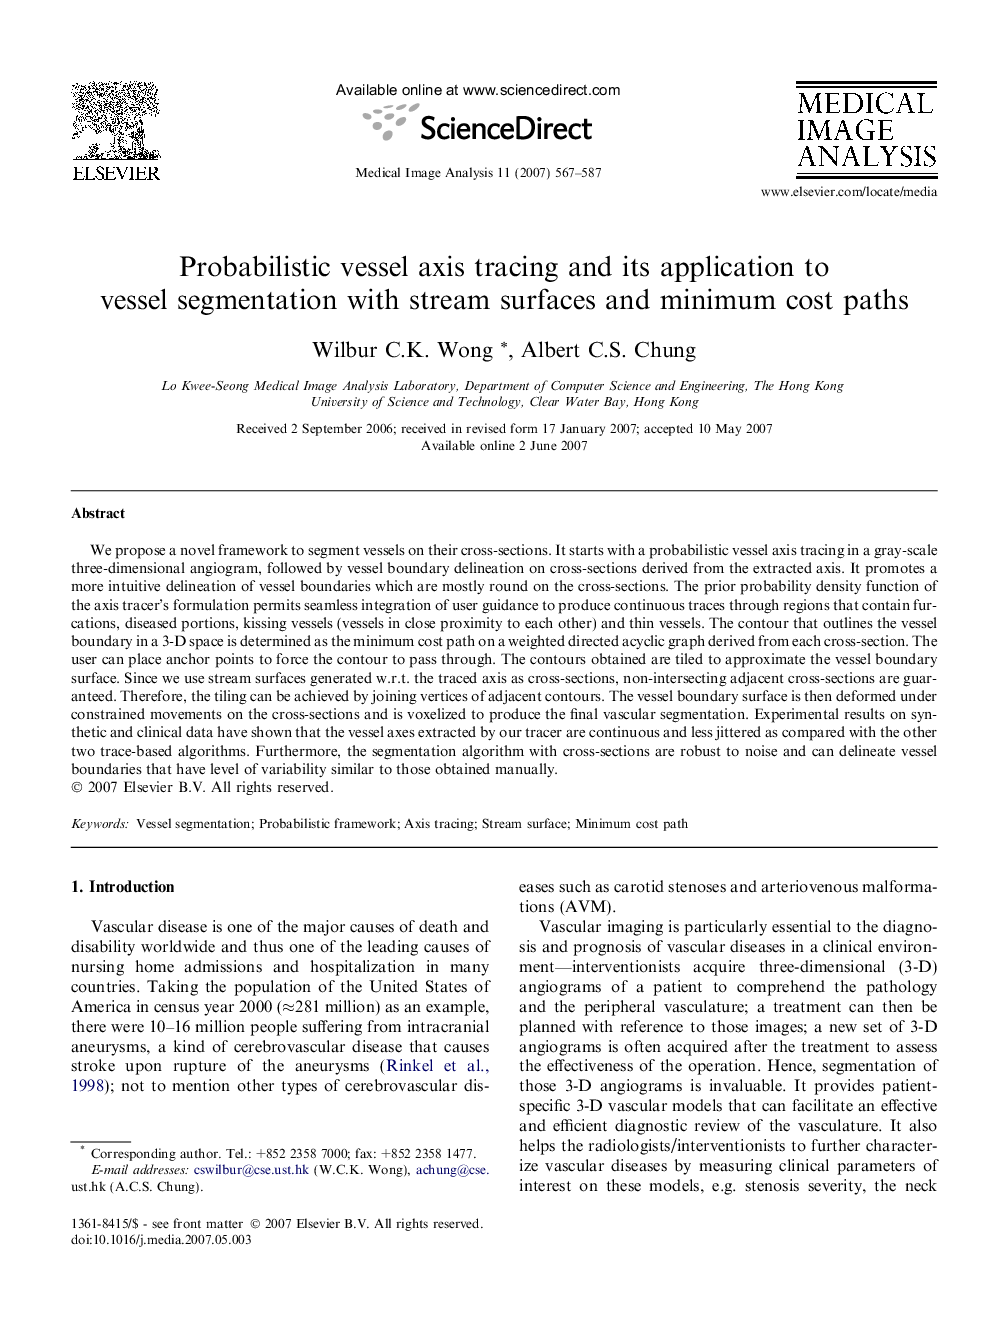 Probabilistic vessel axis tracing and its application to vessel segmentation with stream surfaces and minimum cost paths